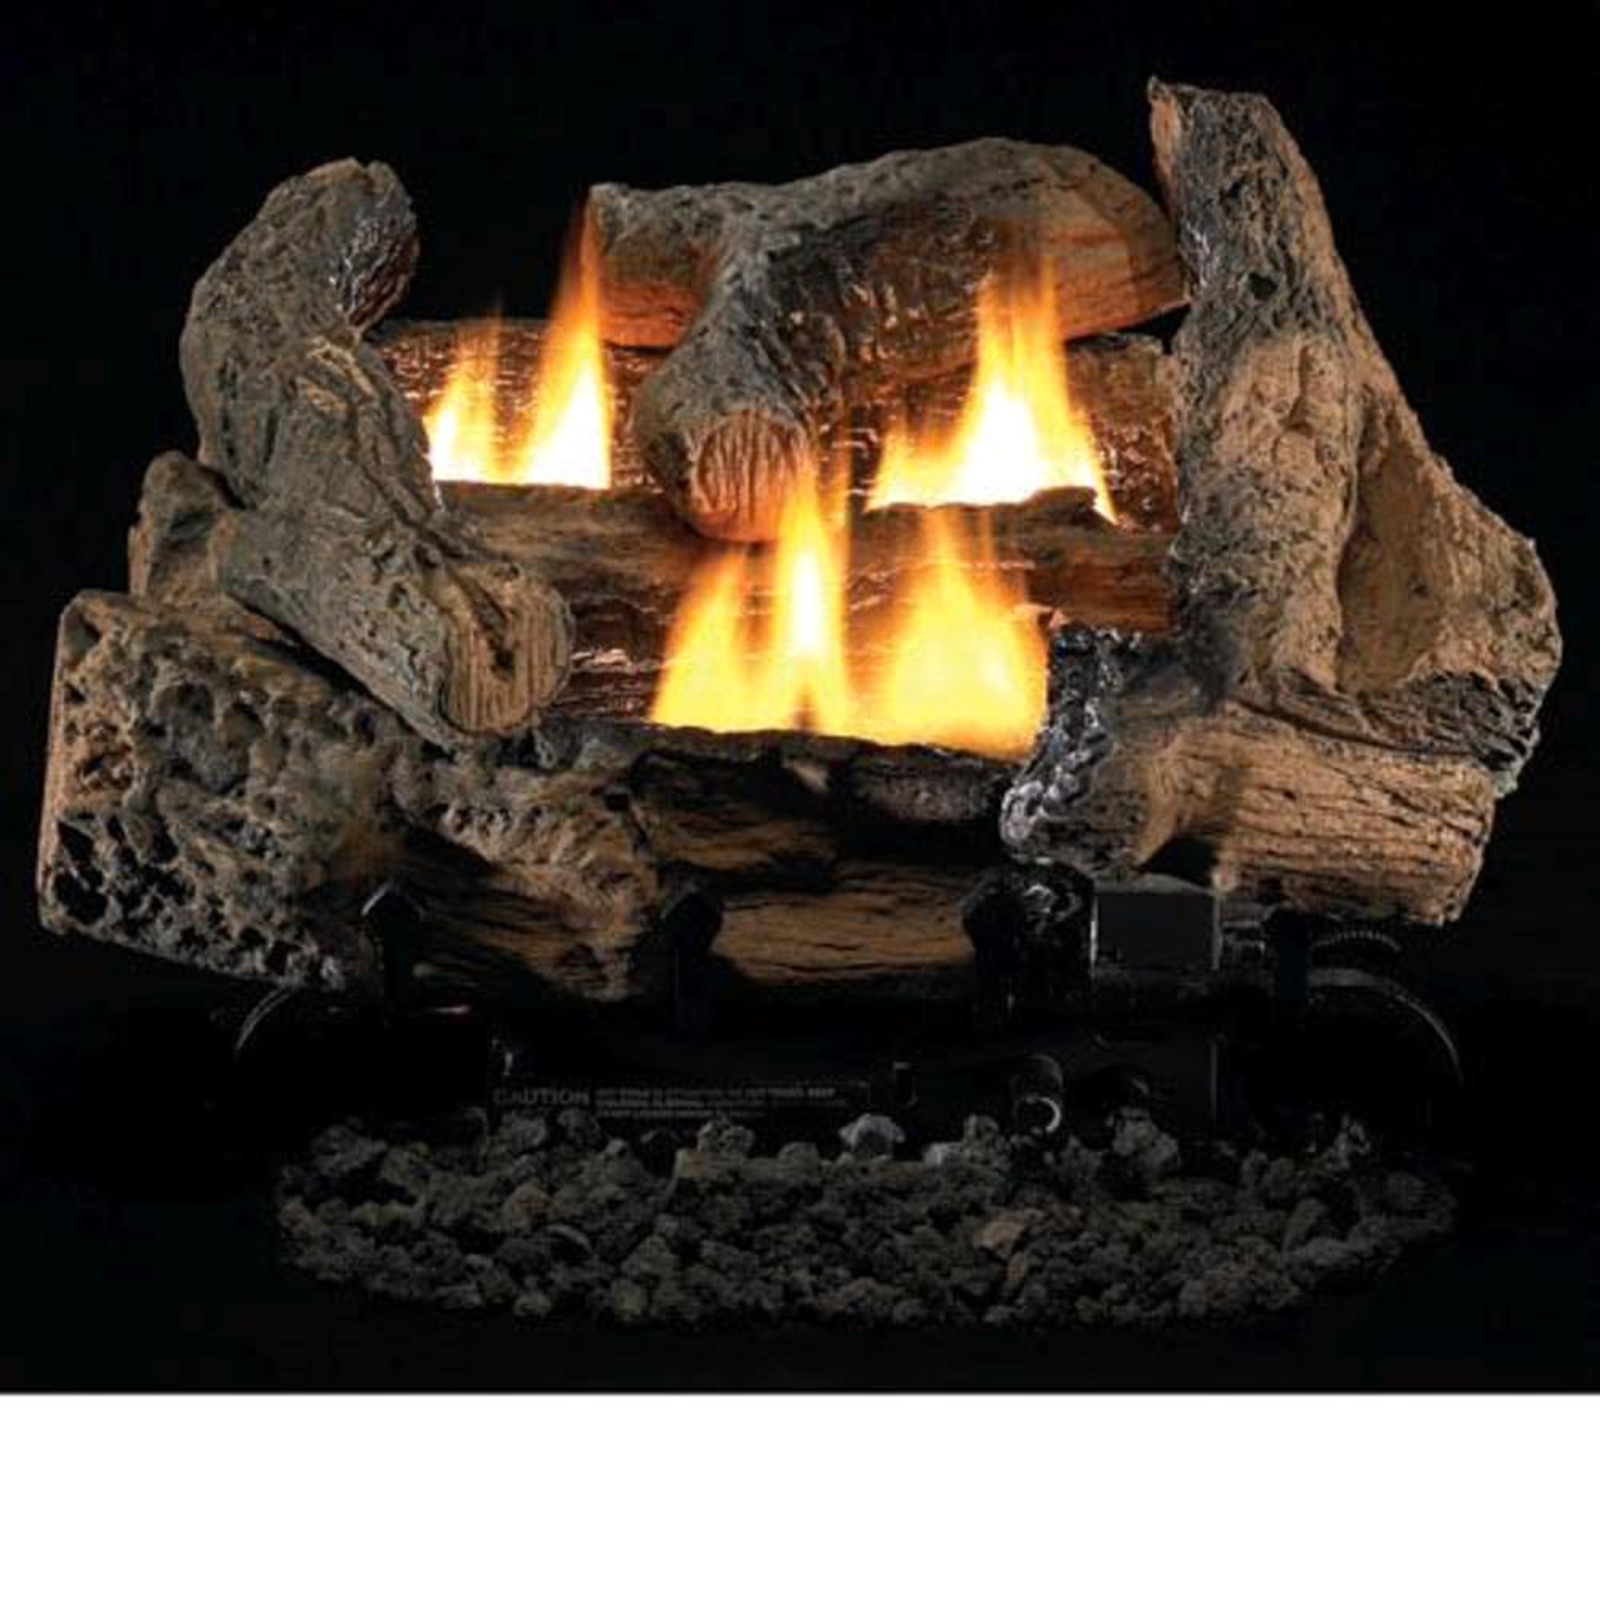 Fireside America Tupelo 2 Vent Free 24" Gas Logs with Millivolt Control